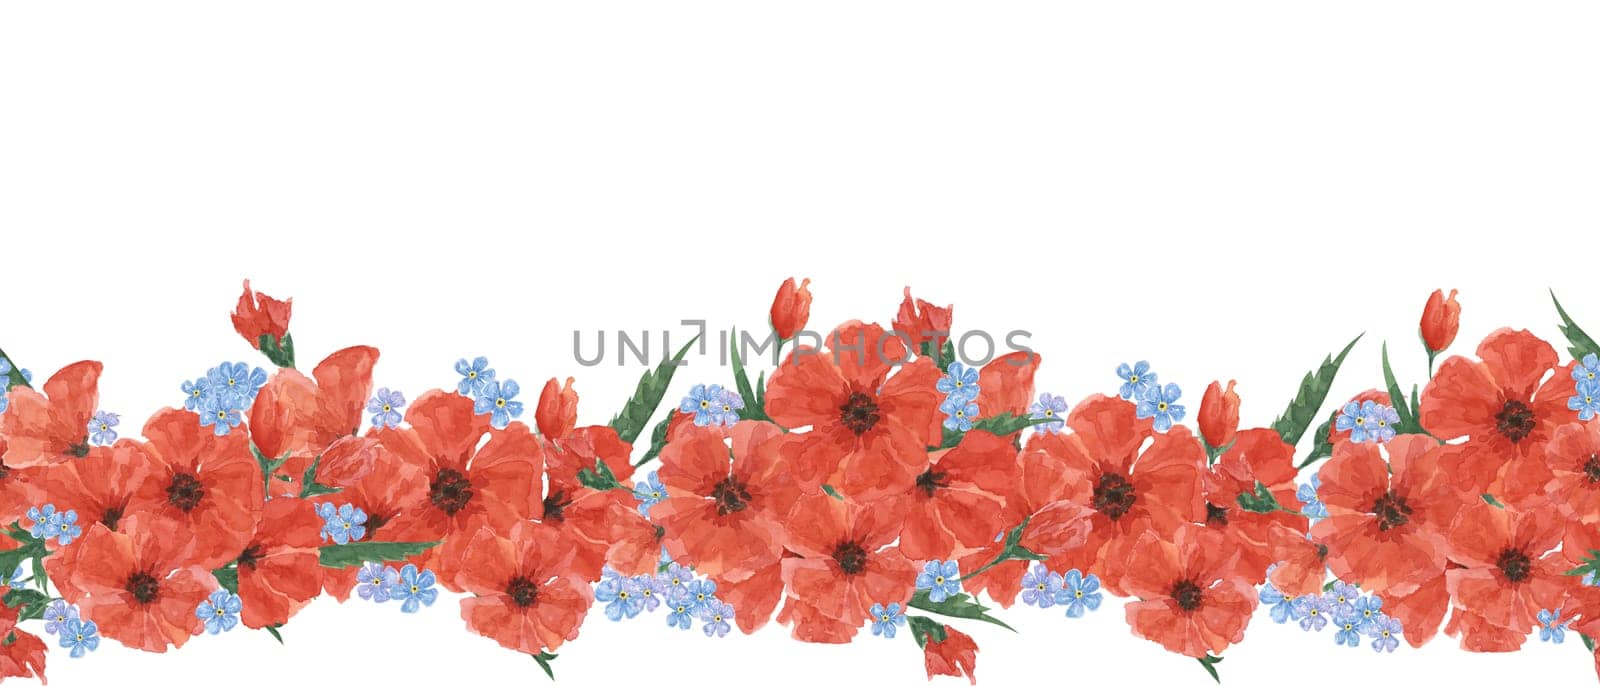 Red poppies and forget-me-nots seamless border. Poppy day flower banner. Hand drawn watercolor illustration for card, banners, commemorative events, US memorial day, Anzac day, flyers, banners, sale